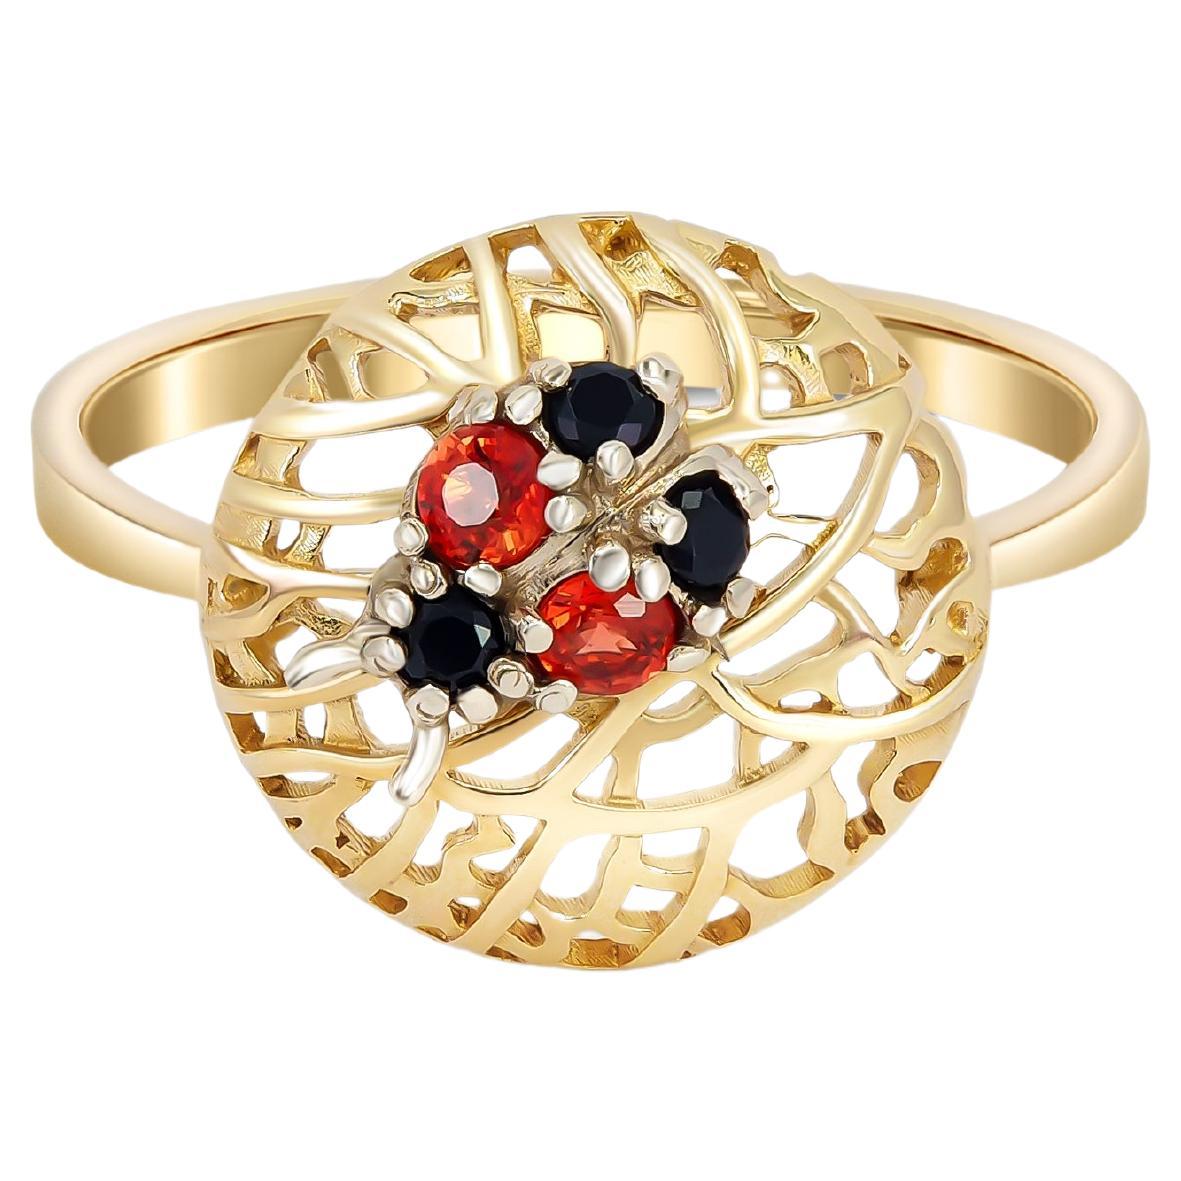 Ladybug ring with colored gemstones.  For Sale